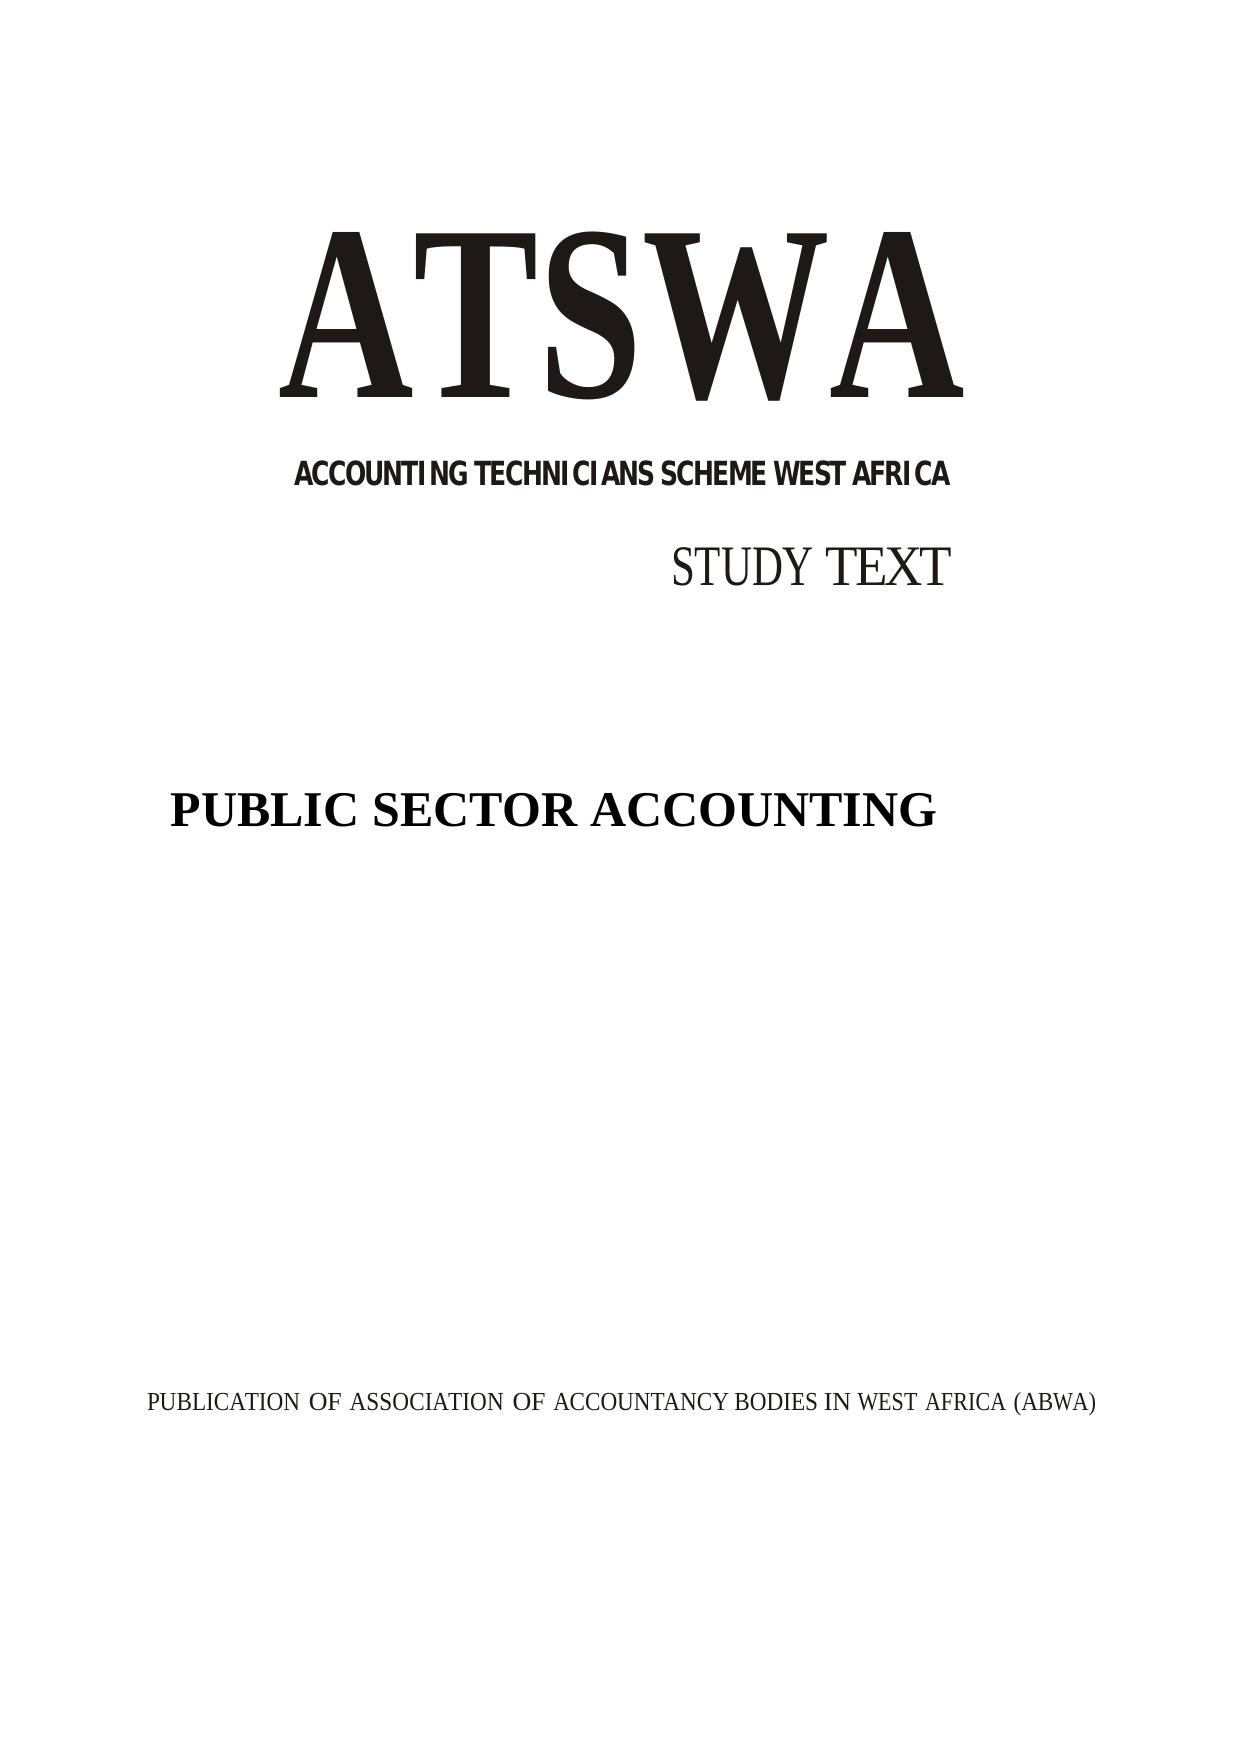 PUBLIC SECTOR ACCOUNTING, 2017